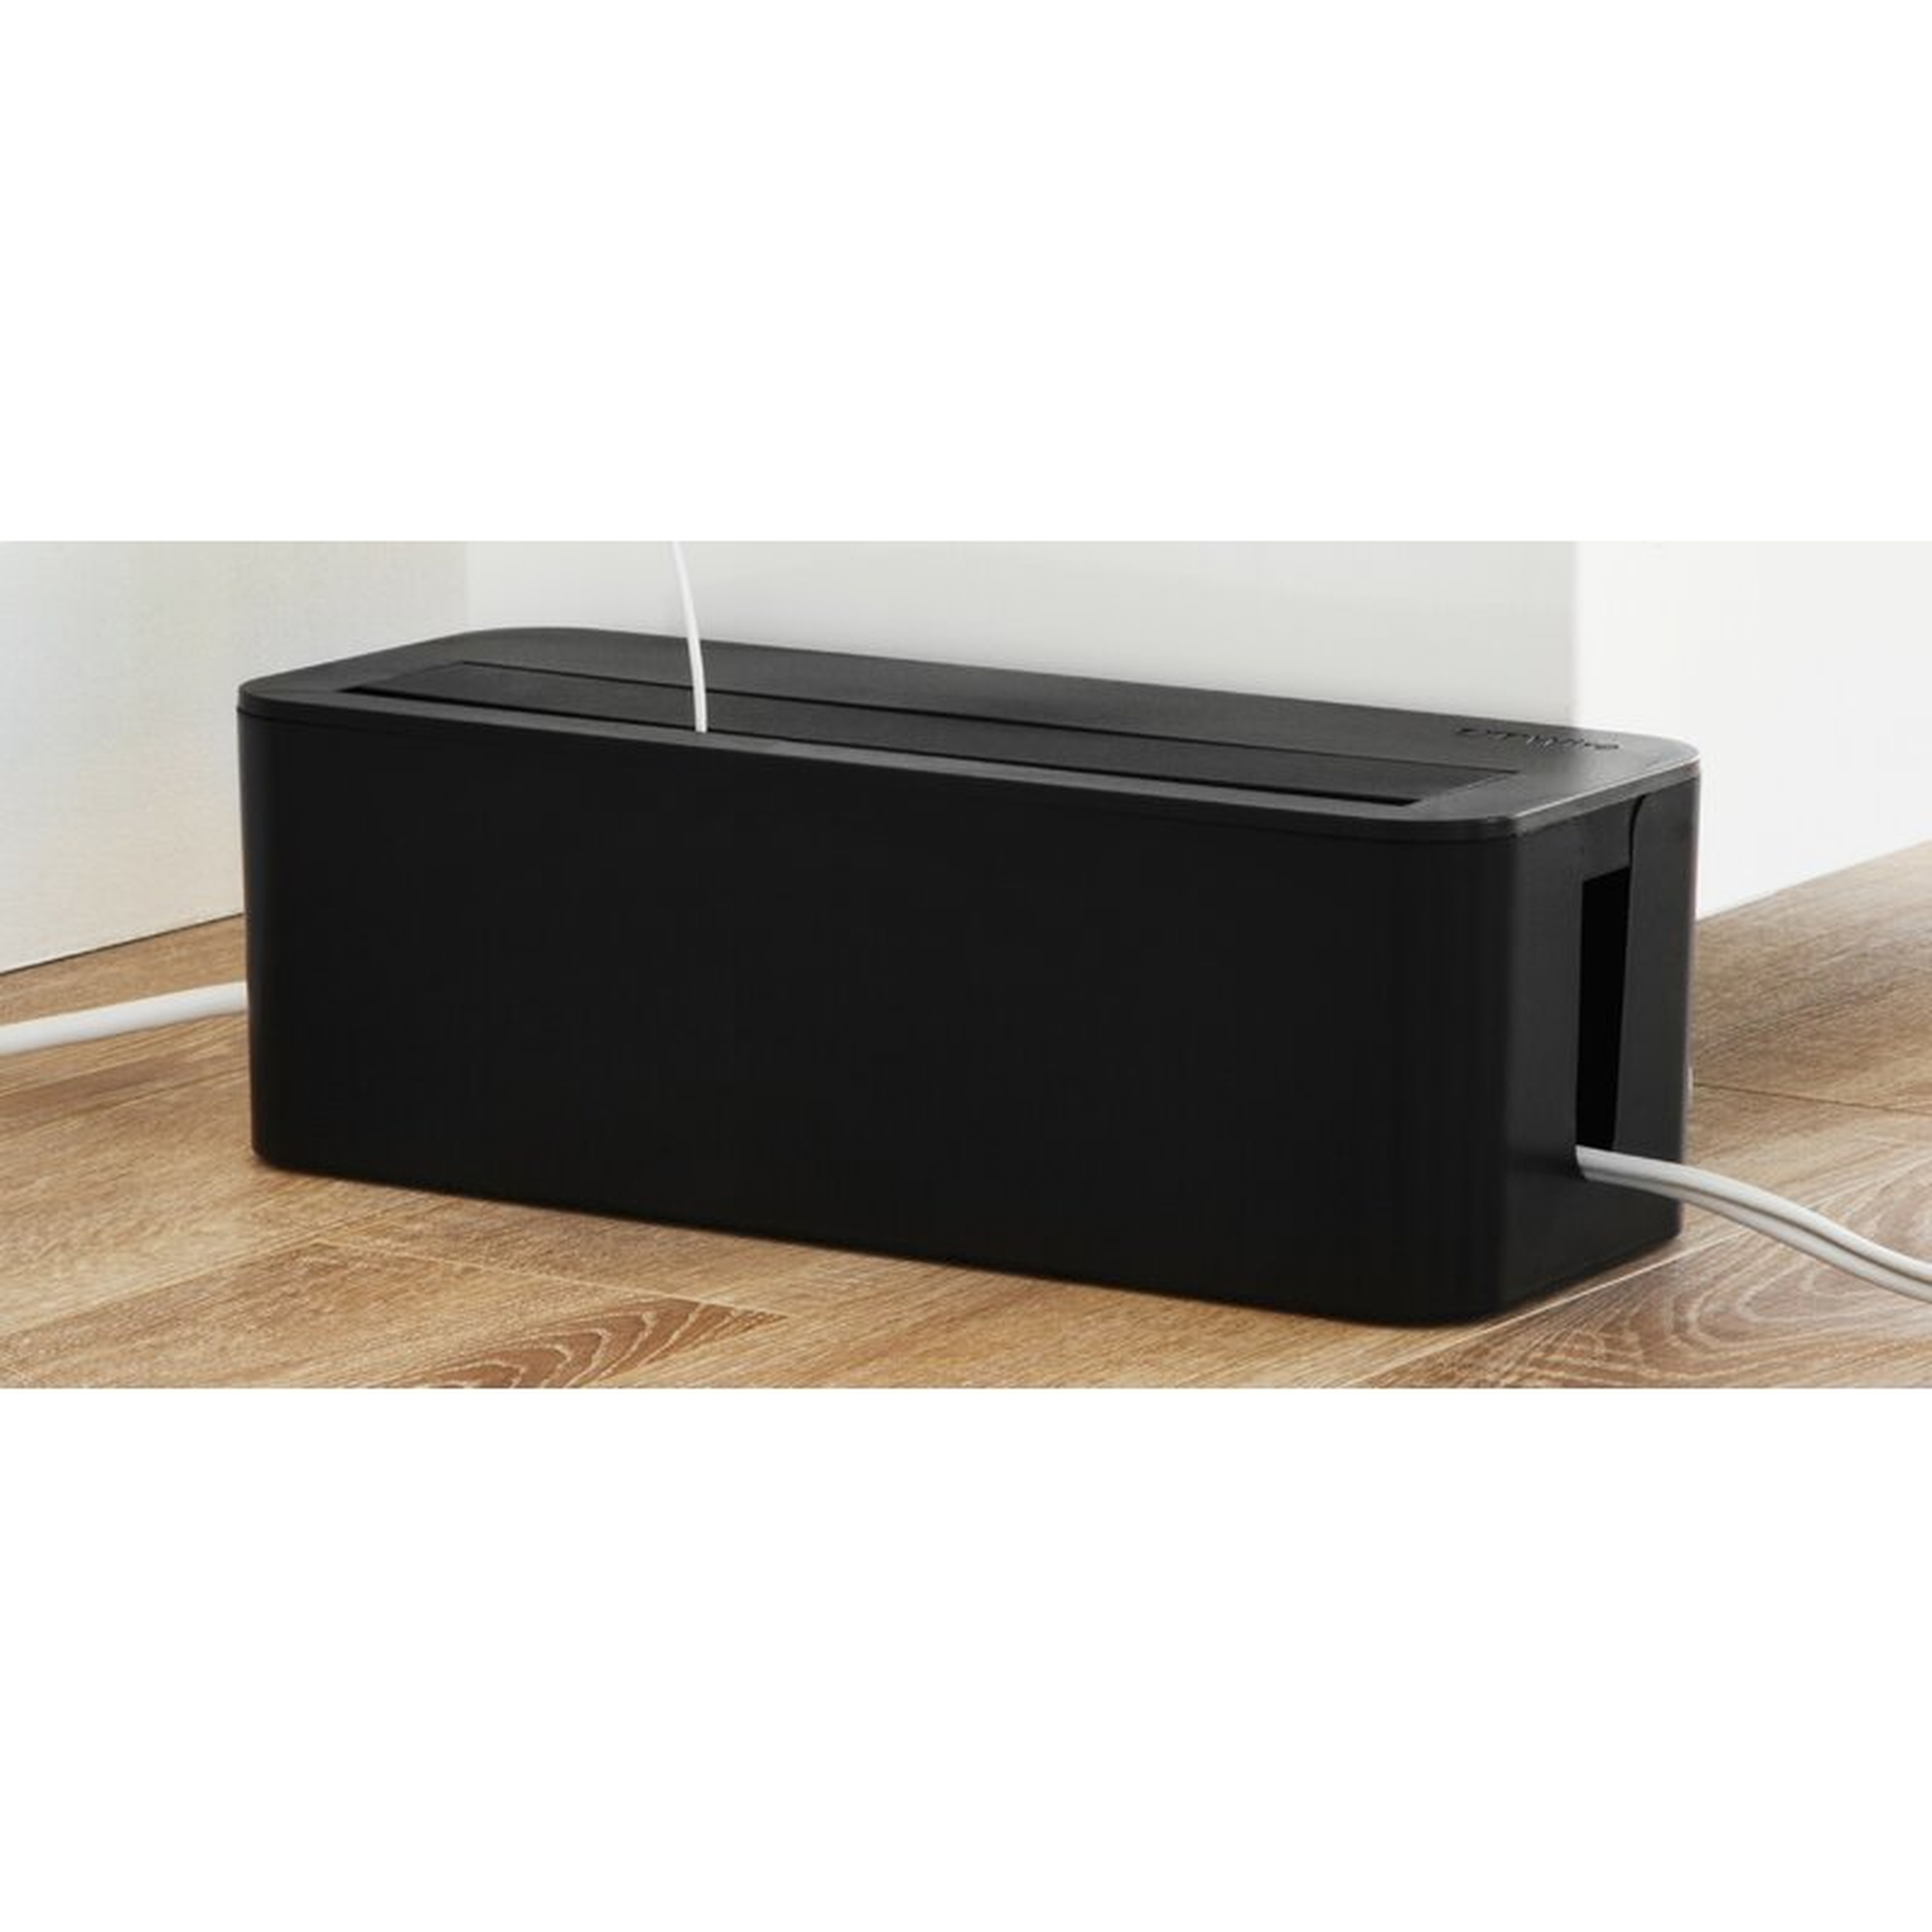 In-Box Cable Management Organizing Box for Under Desk - Wayfair